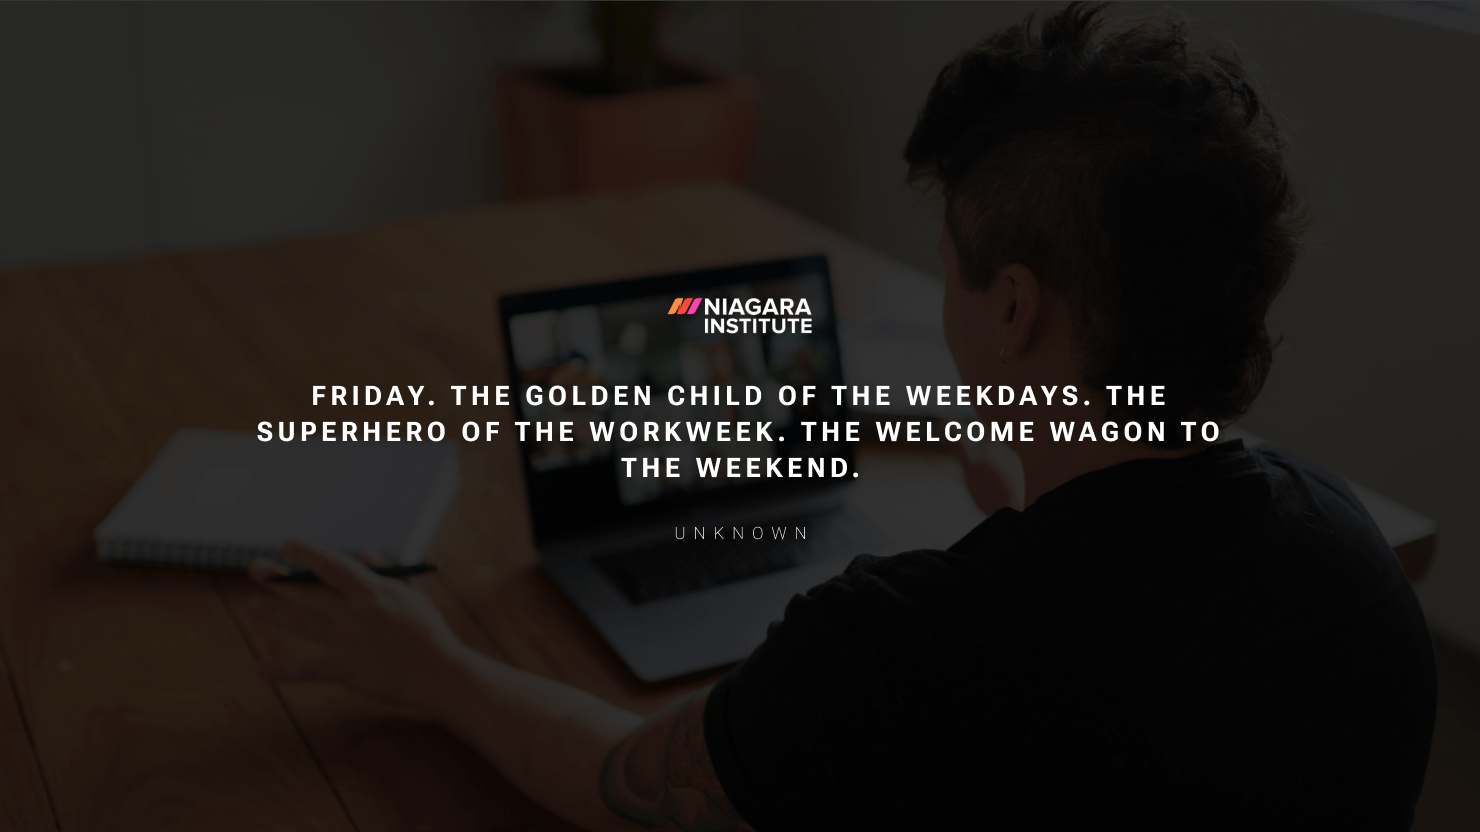 Friday. The golden child of the weekdays. The superhero of the workweek. The welcome wagon to the weekend